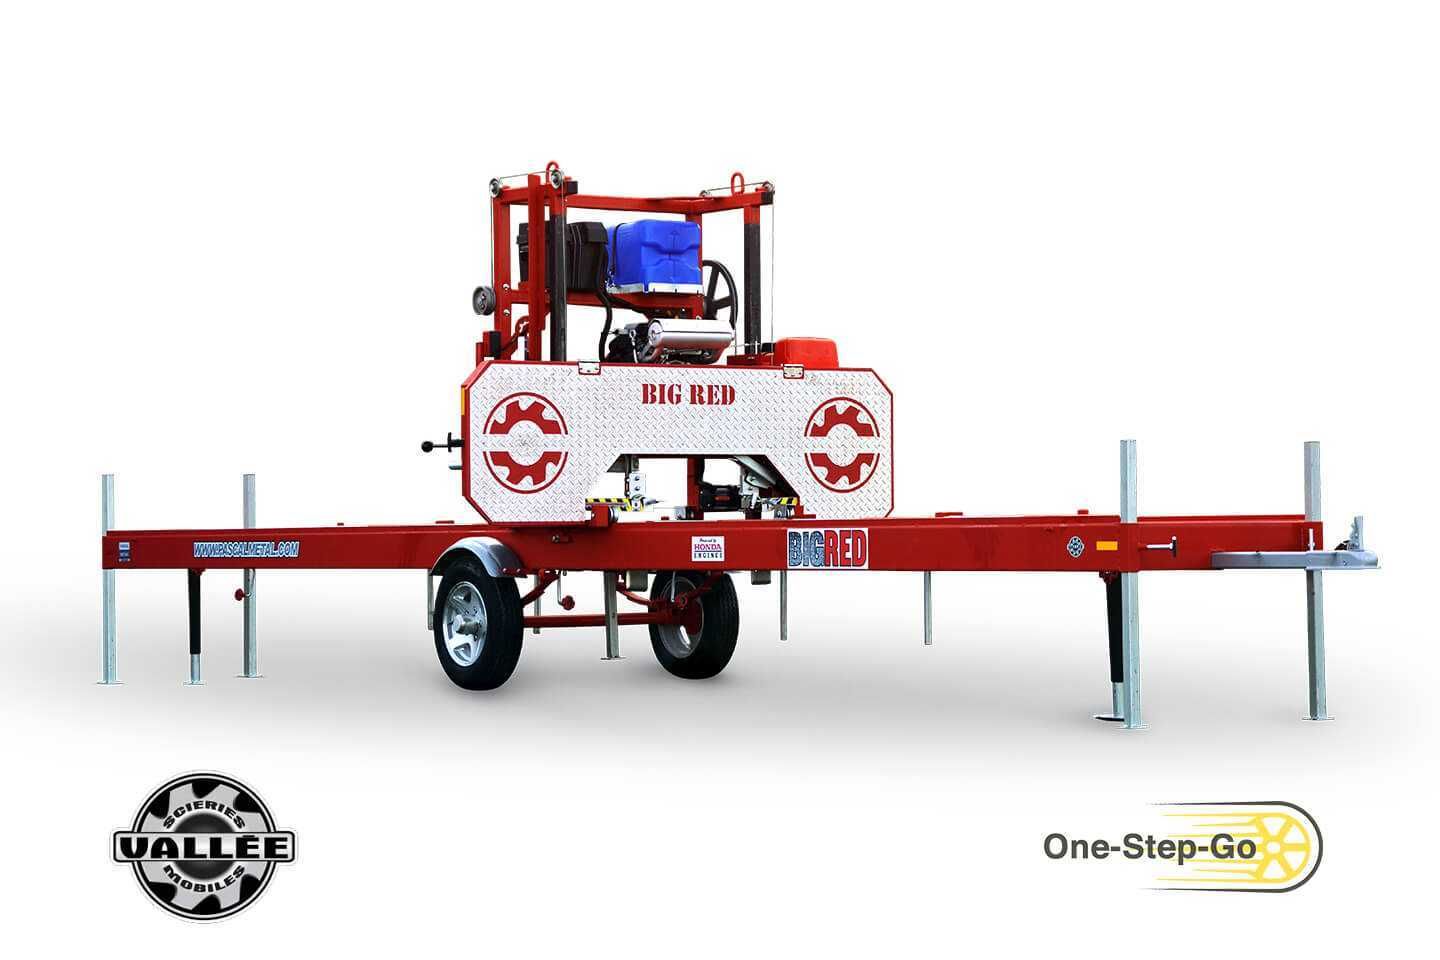 Big red - scieries mobiles - vallee forestry equipment - essieux simple_0